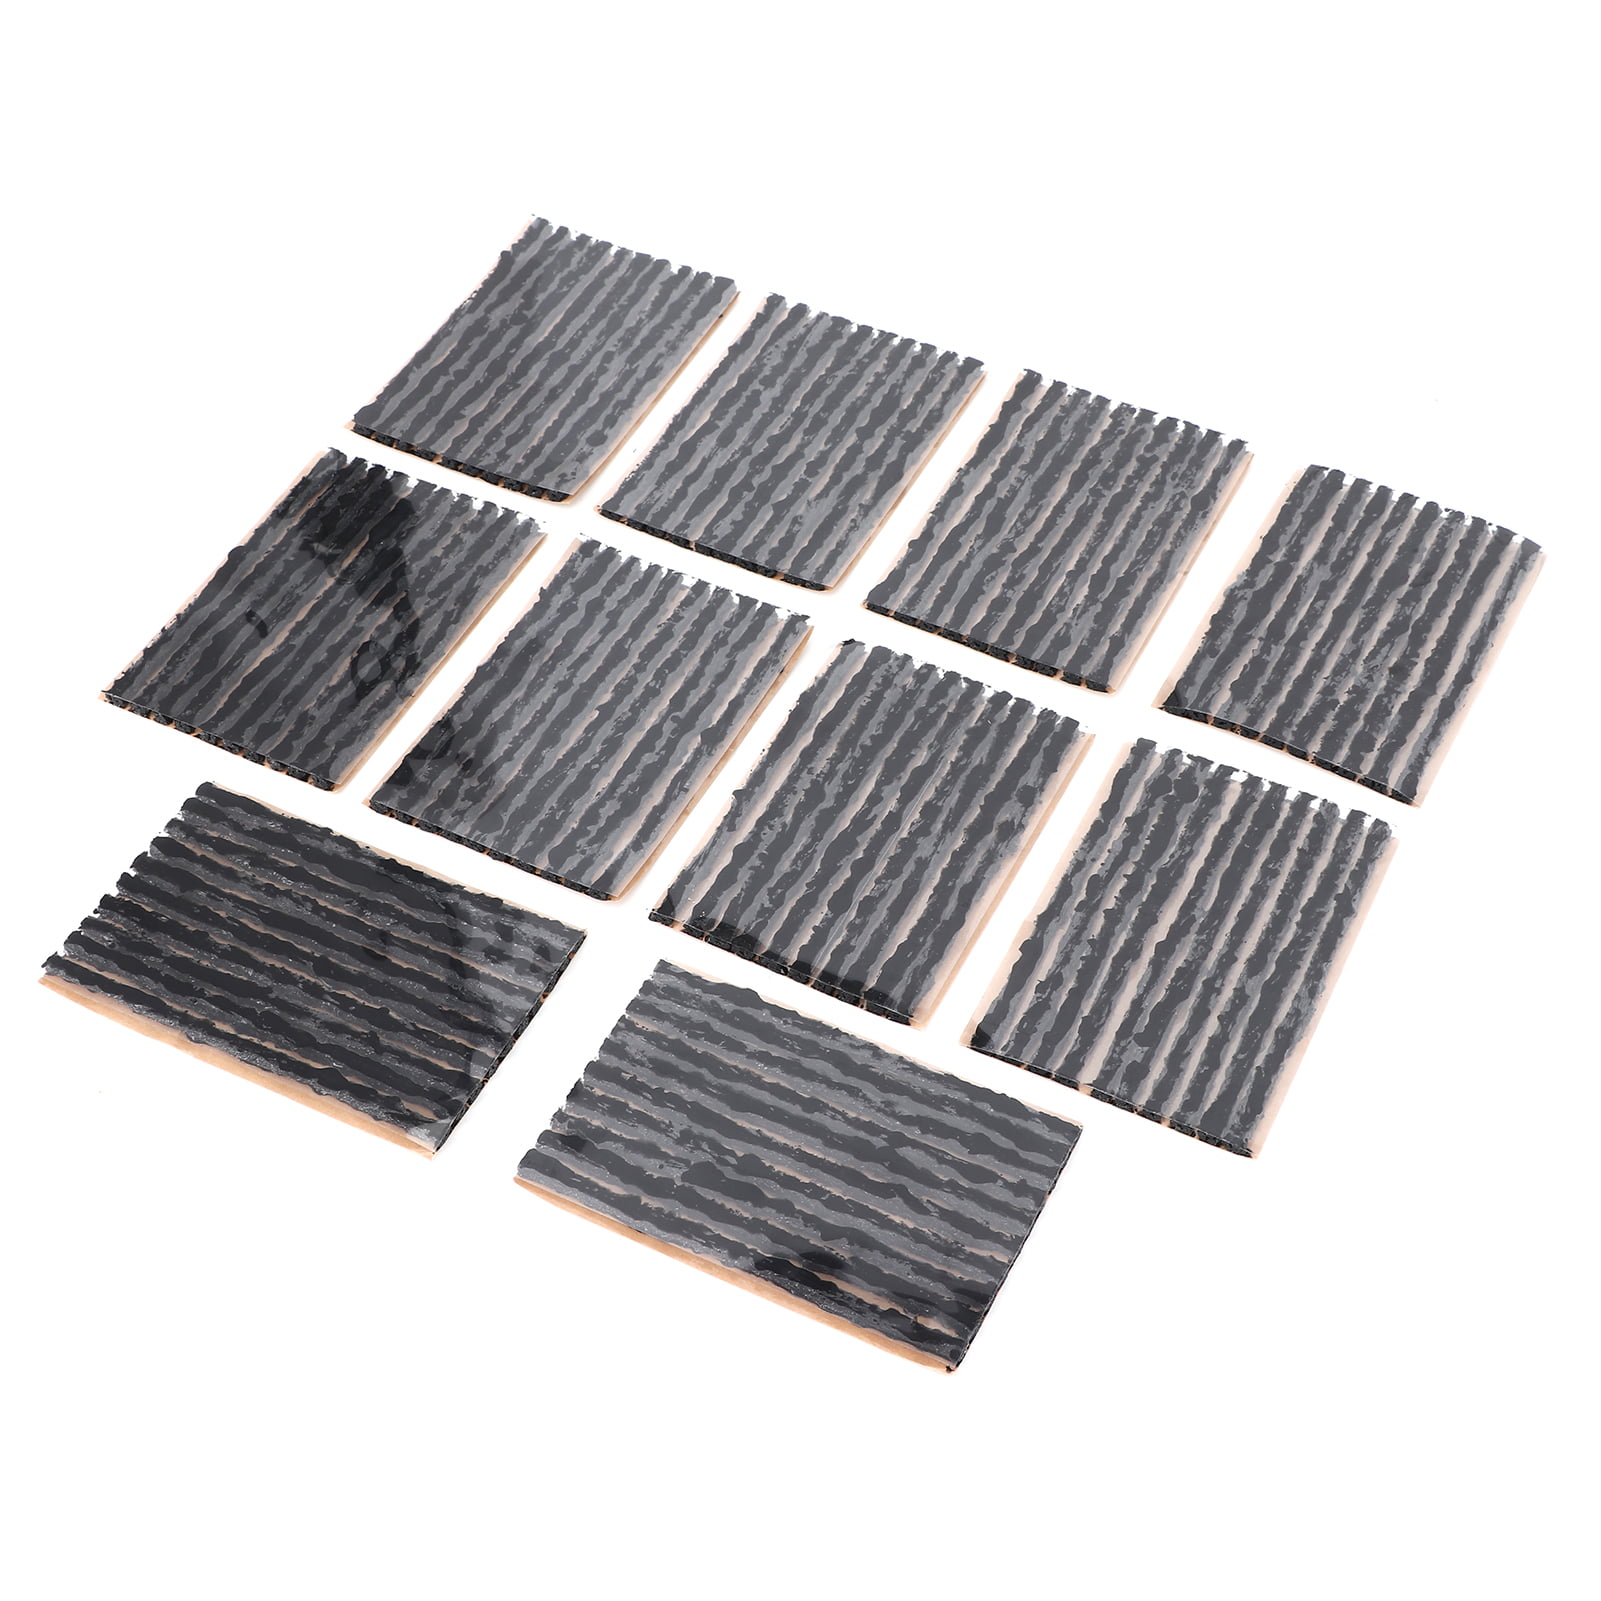 Black 100pcs Rubber Tire Seal Plug 100x3mm Tubeless Tyre Rubber Sealing Strip for Car Motorcyclew Yctze Tire Repair Plug 